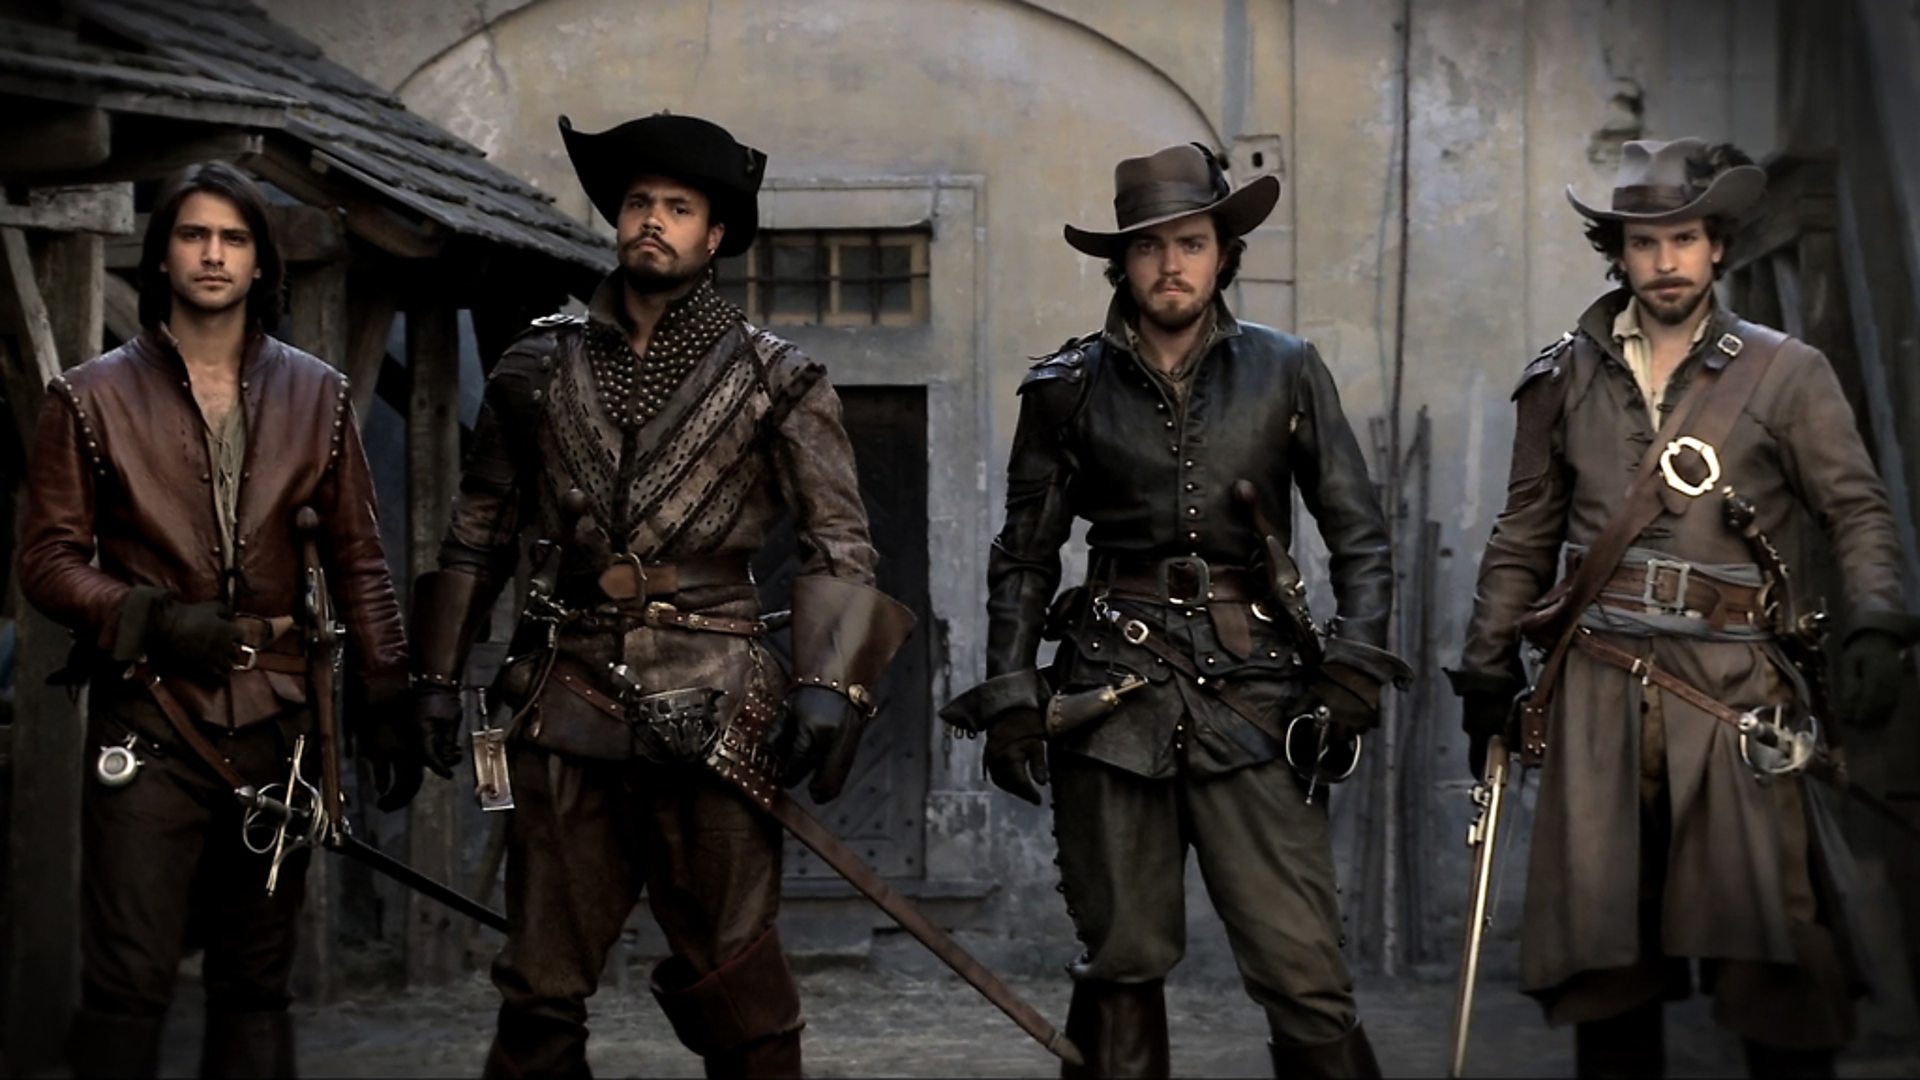 High Resolution Wallpaper | The Musketeers 1920x1080 px